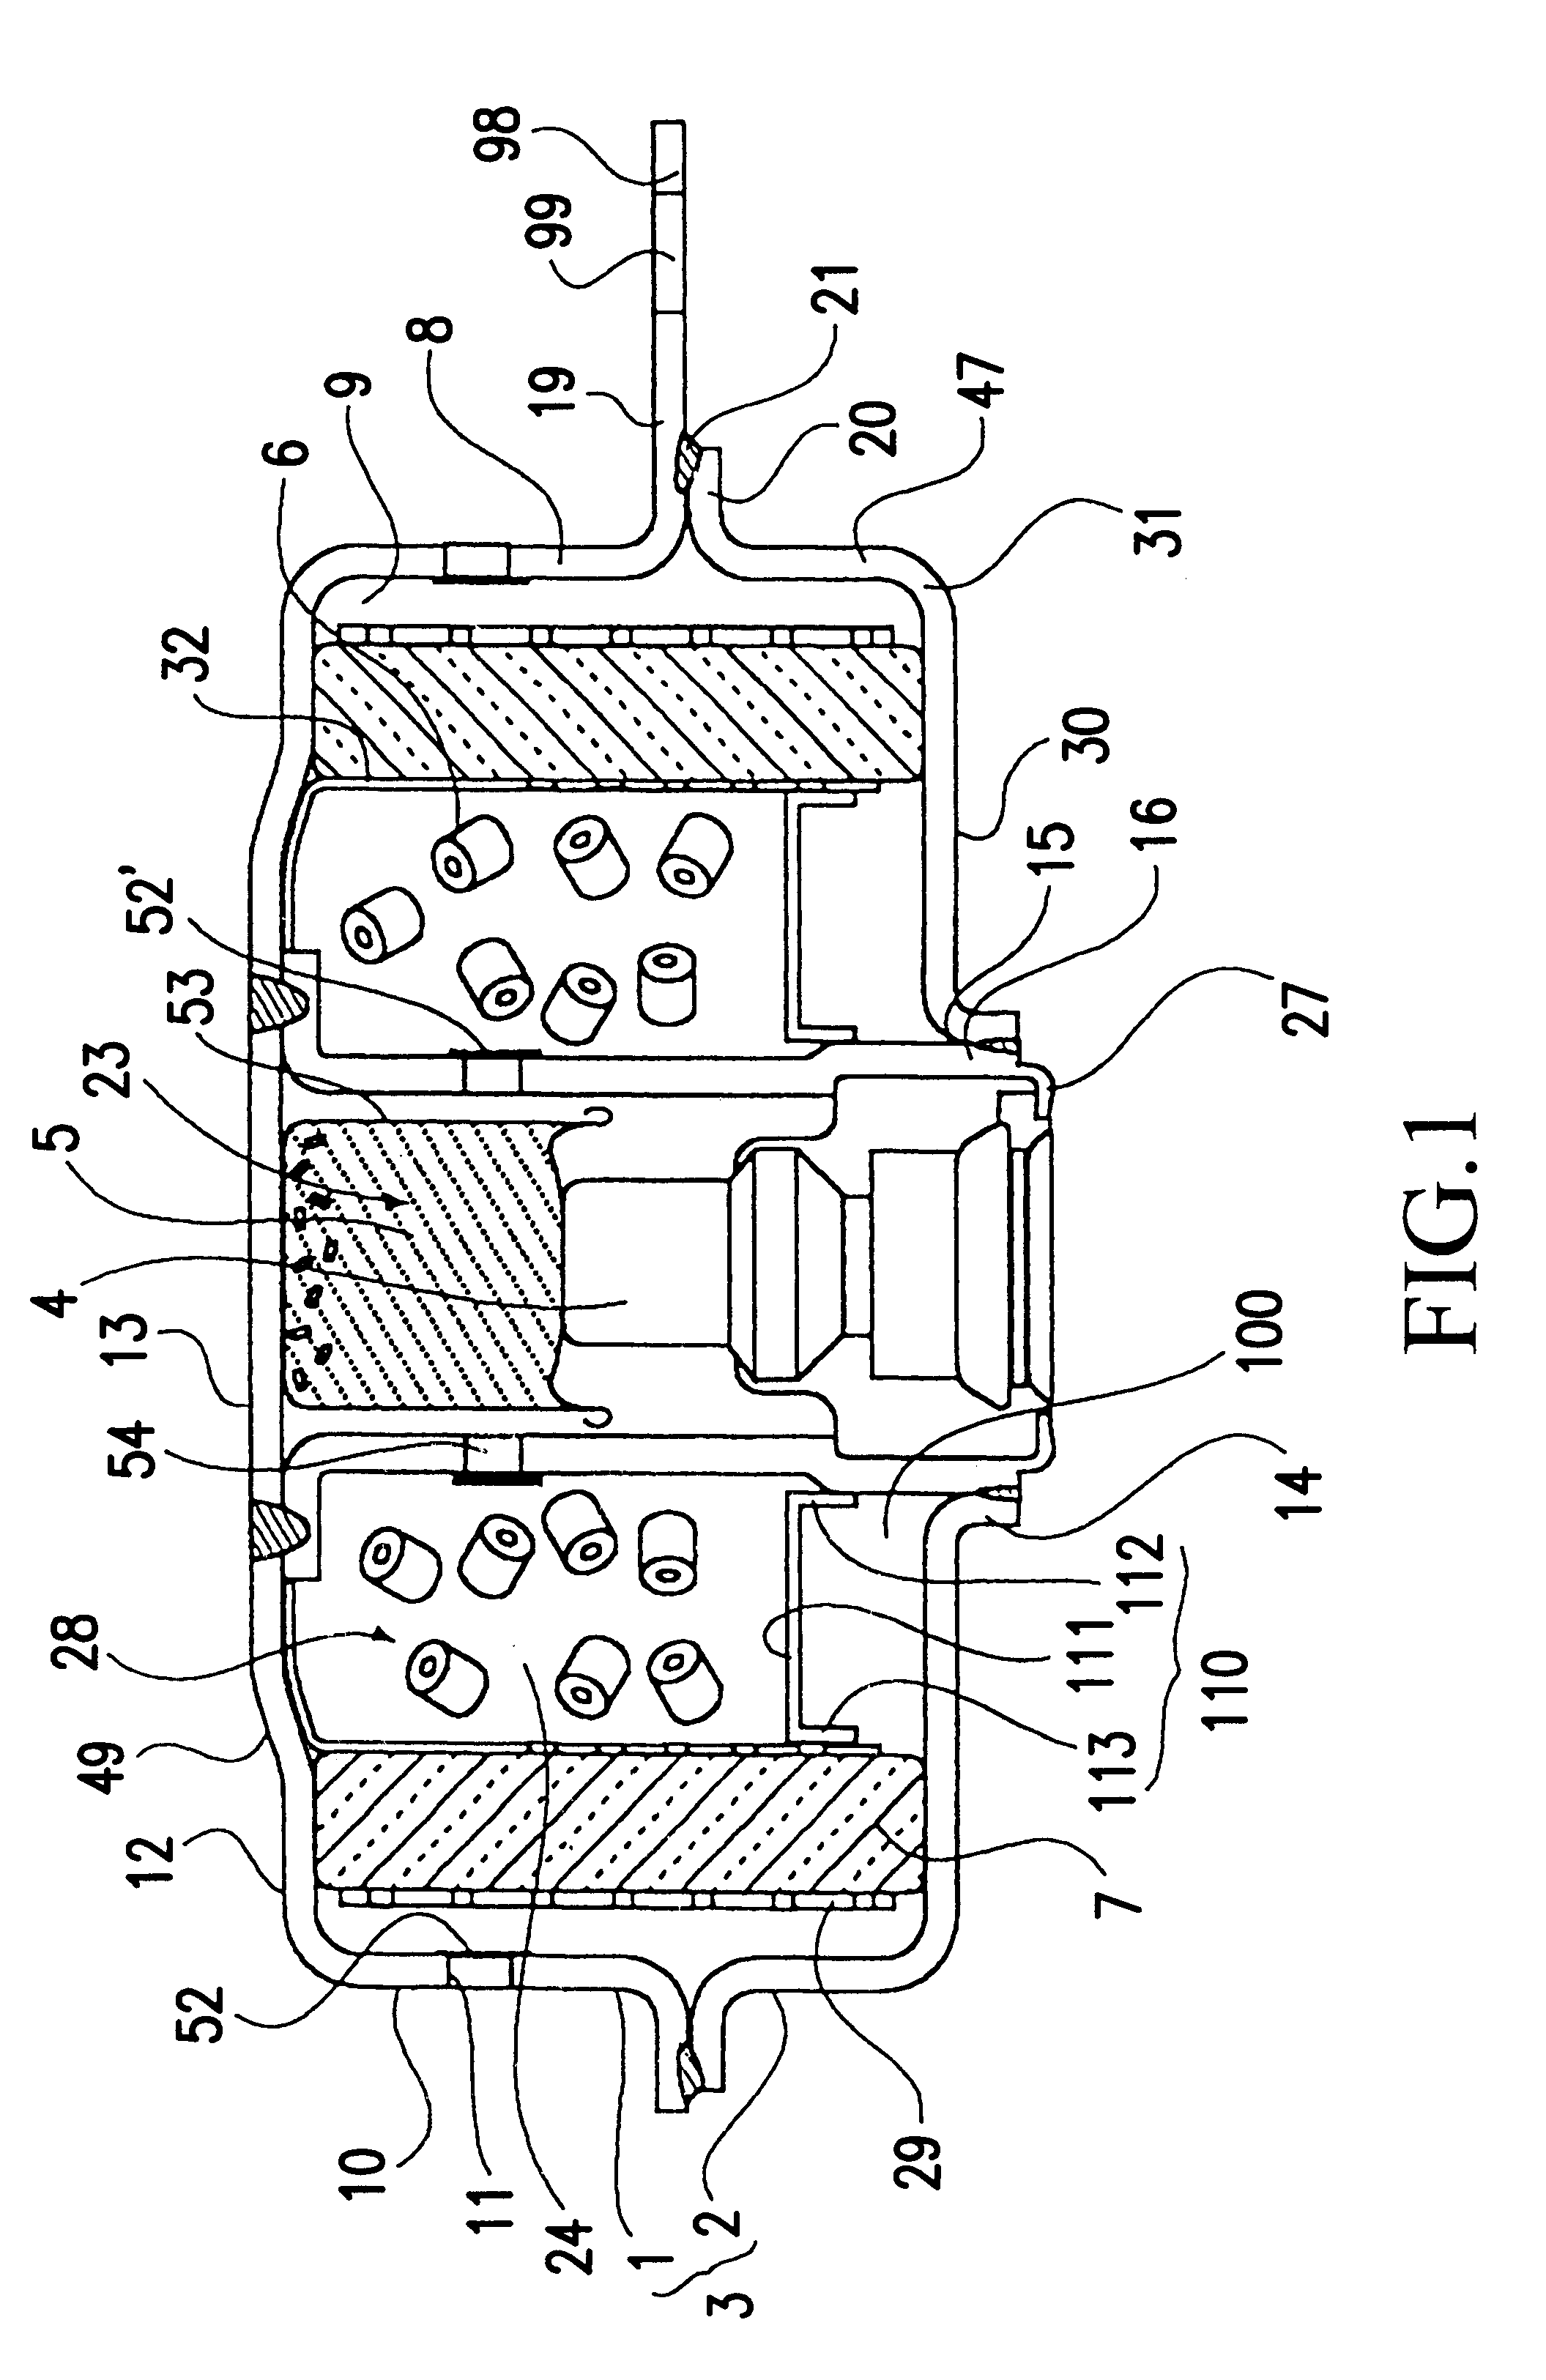 Airbag gas generator and an airbag apparatus